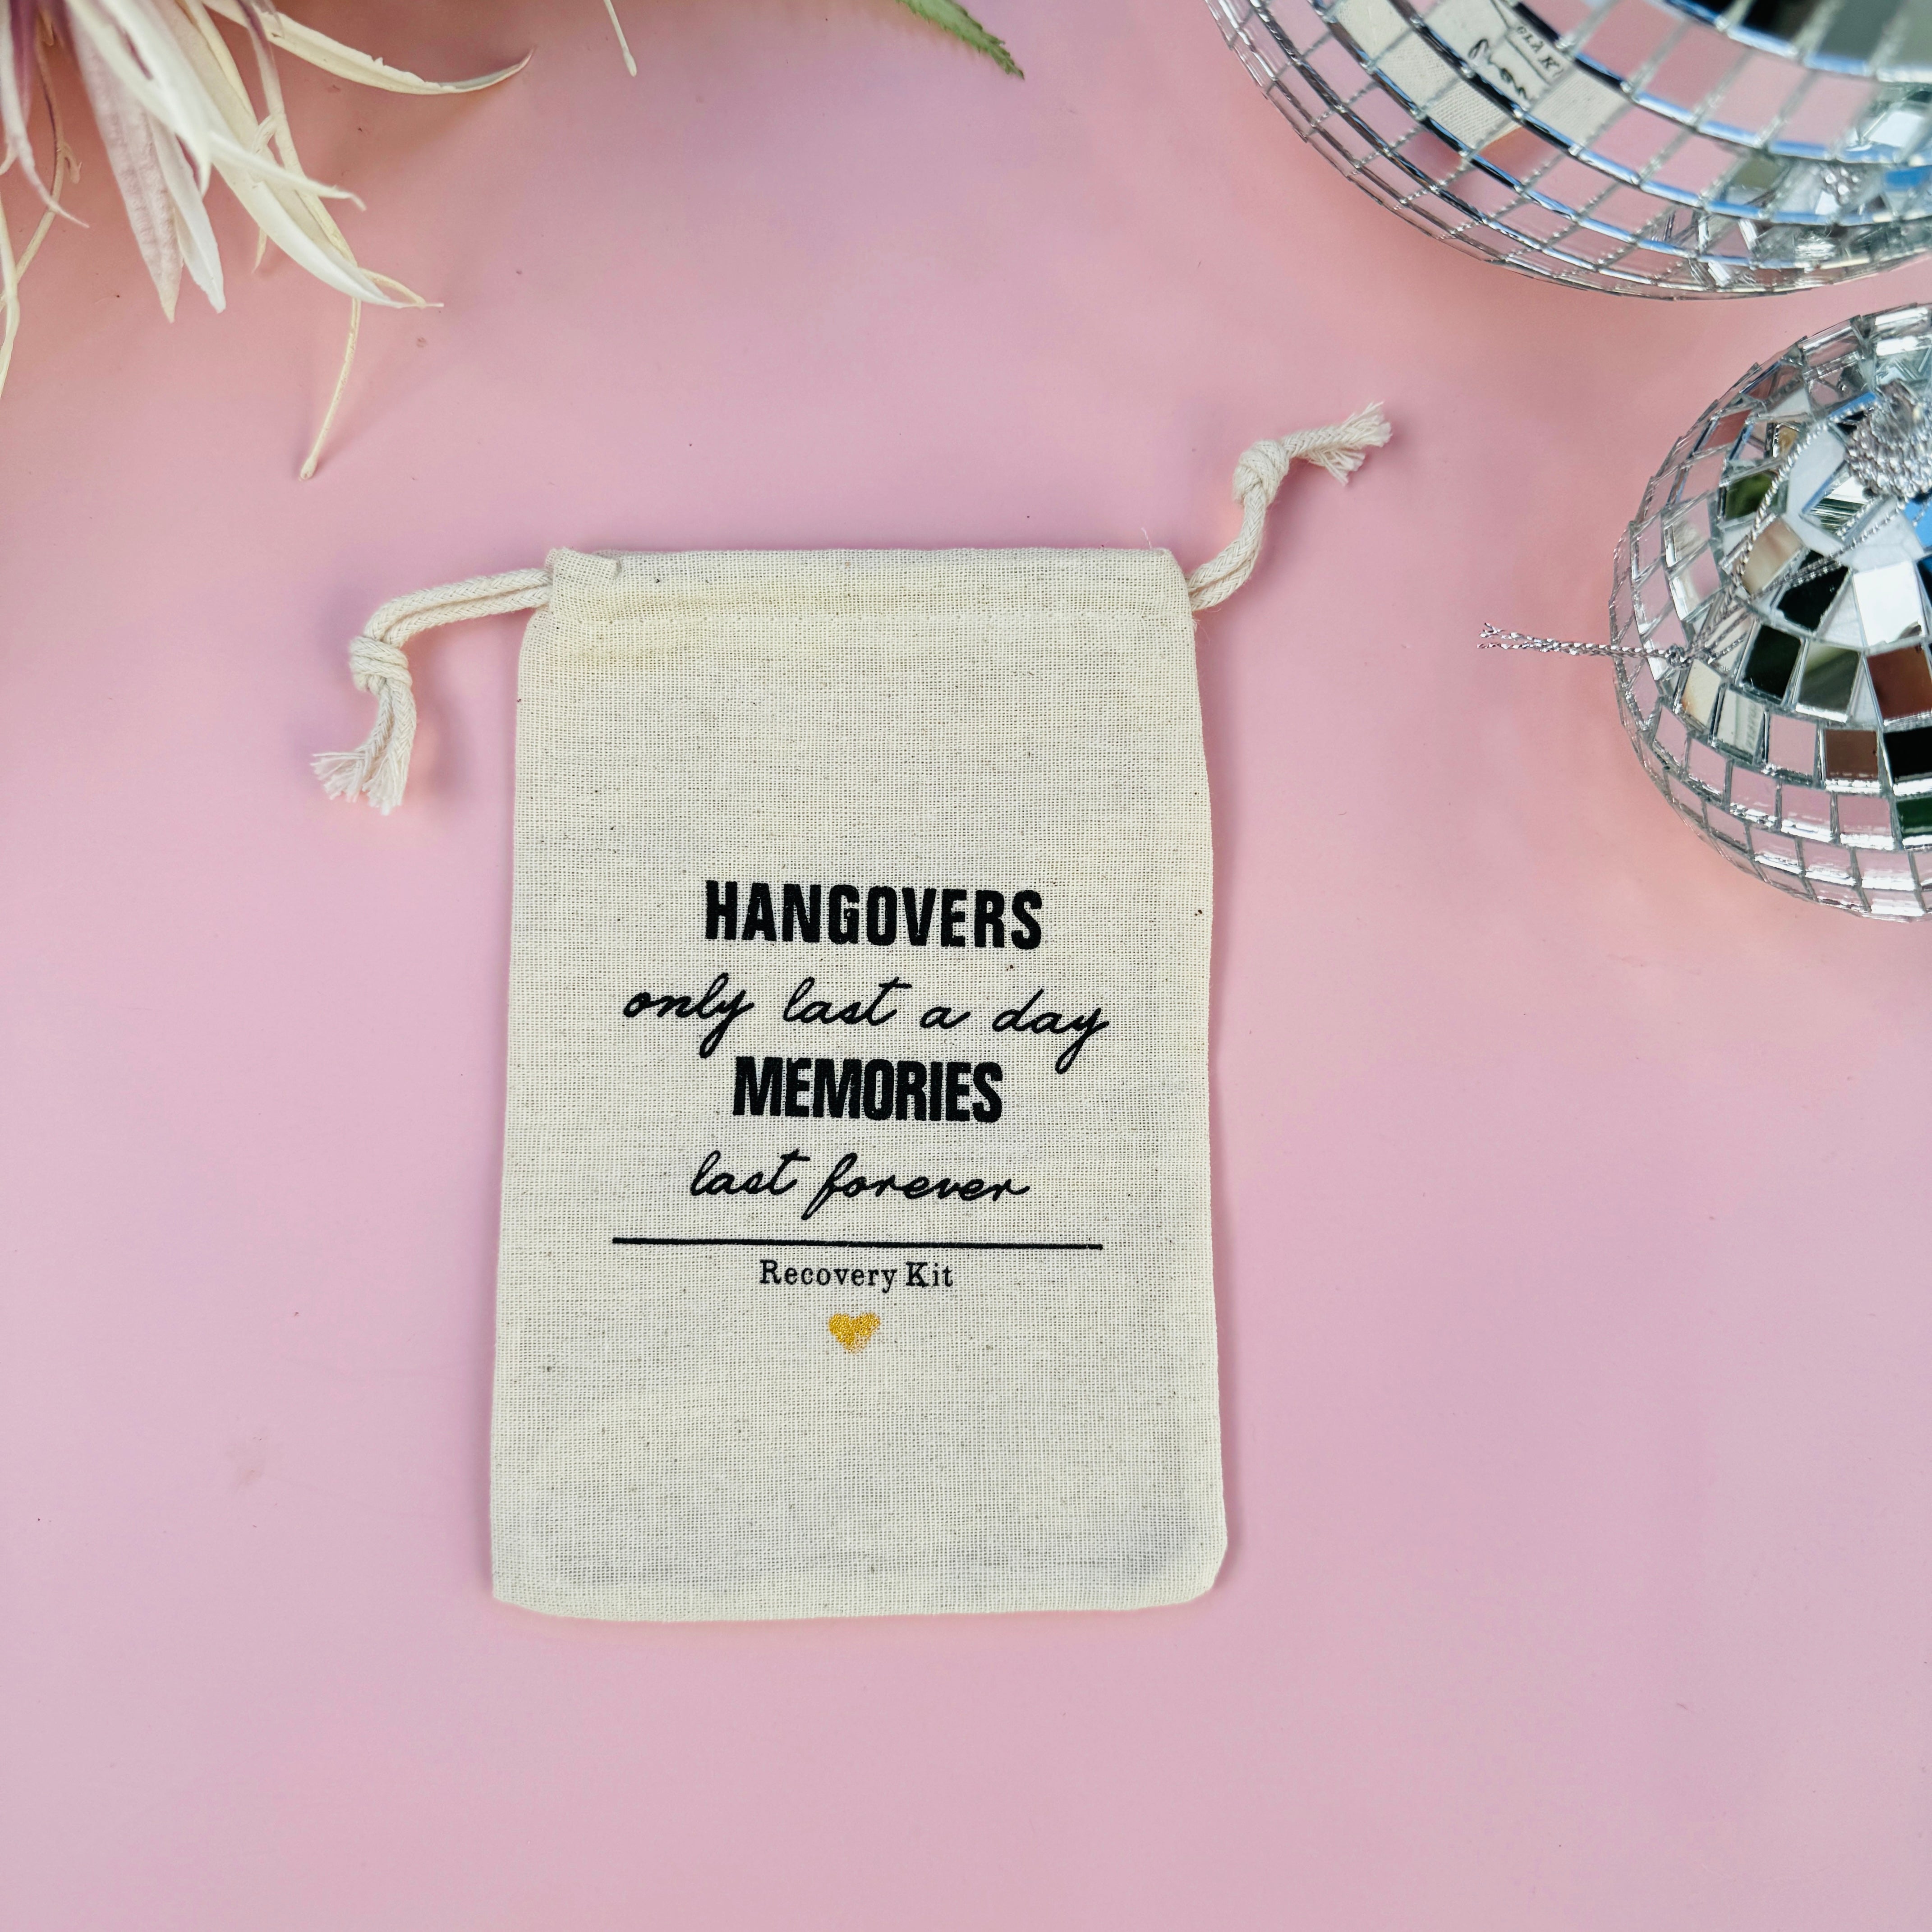 10x Bachelorette Party Bags - I Regret Nothing Hangover Kit Bags - Hangover Recovery Kit